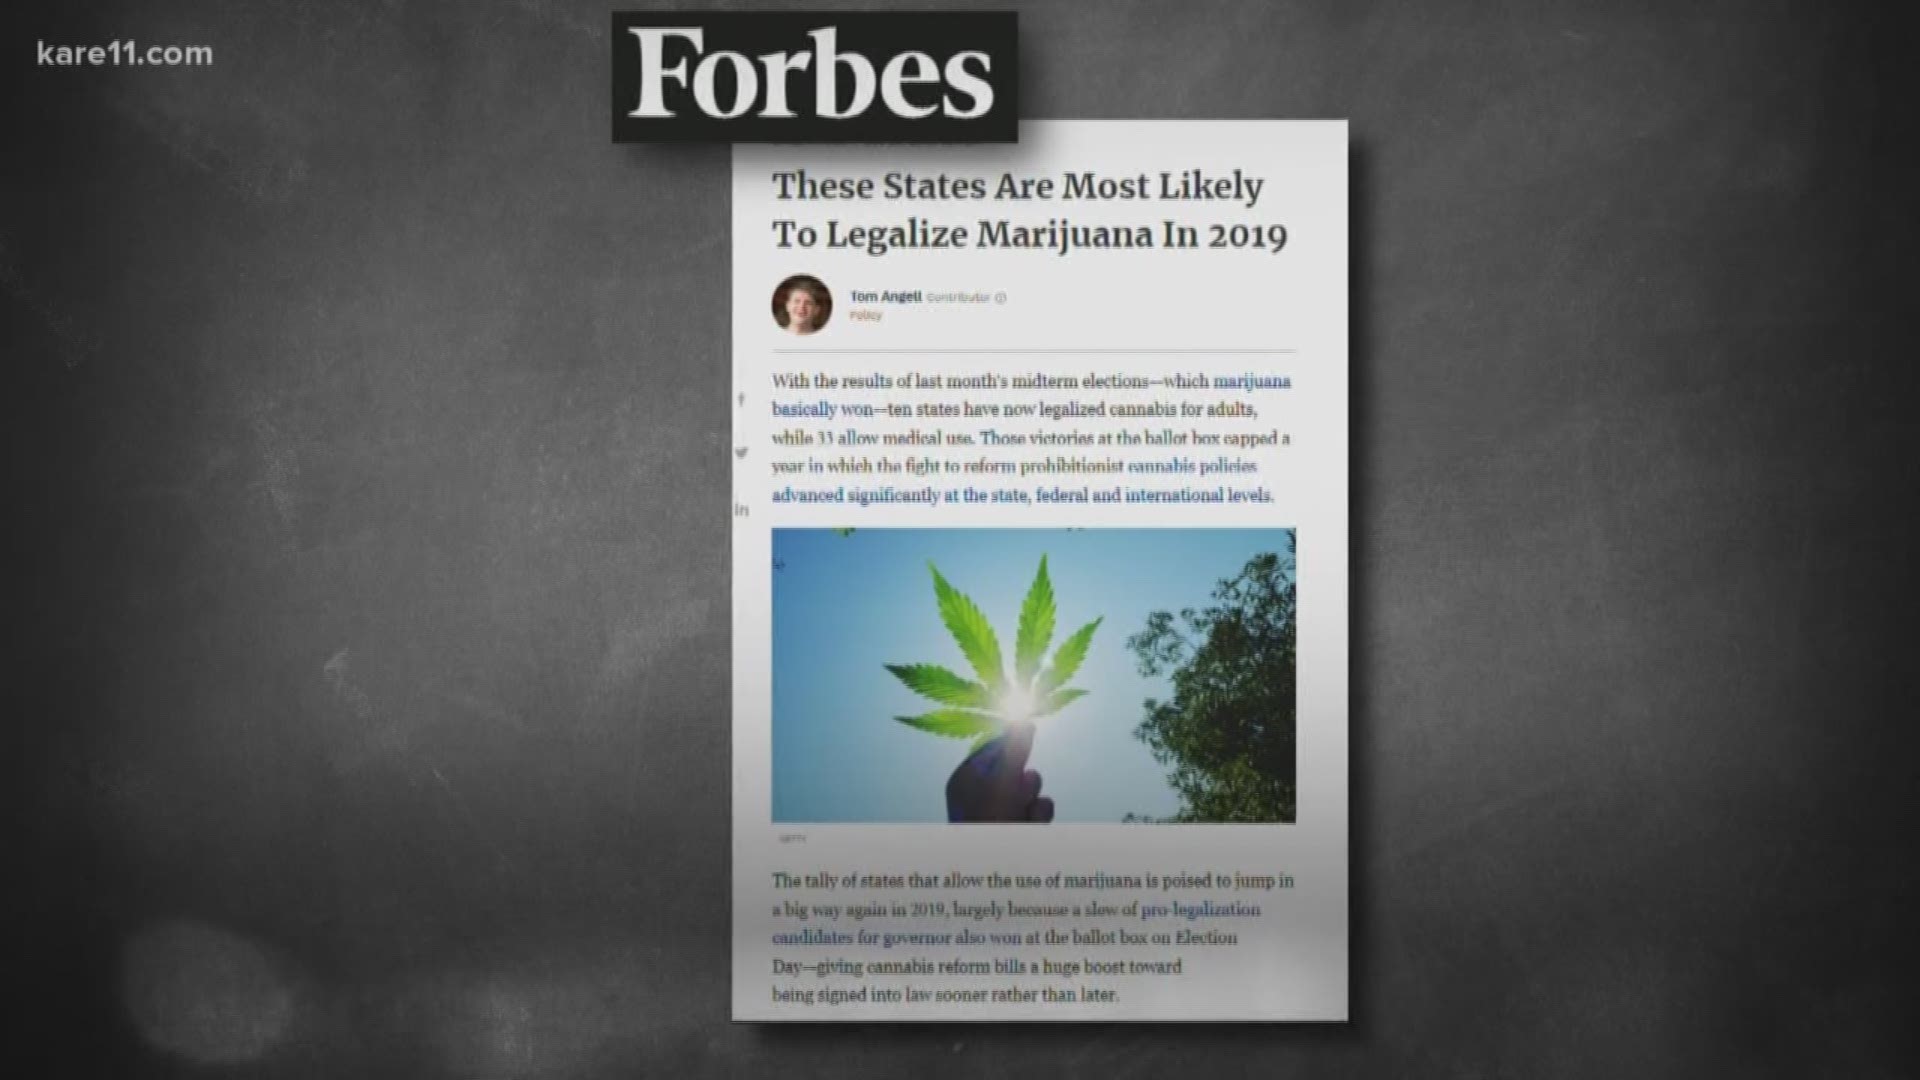 It's a buzzy headline for Forbes: "These States Are Most Likely to Legalize Marijuana in 2019," with Minnesota as one of the top states on the list. But is it true? https://kare11.tv/2CM08hc